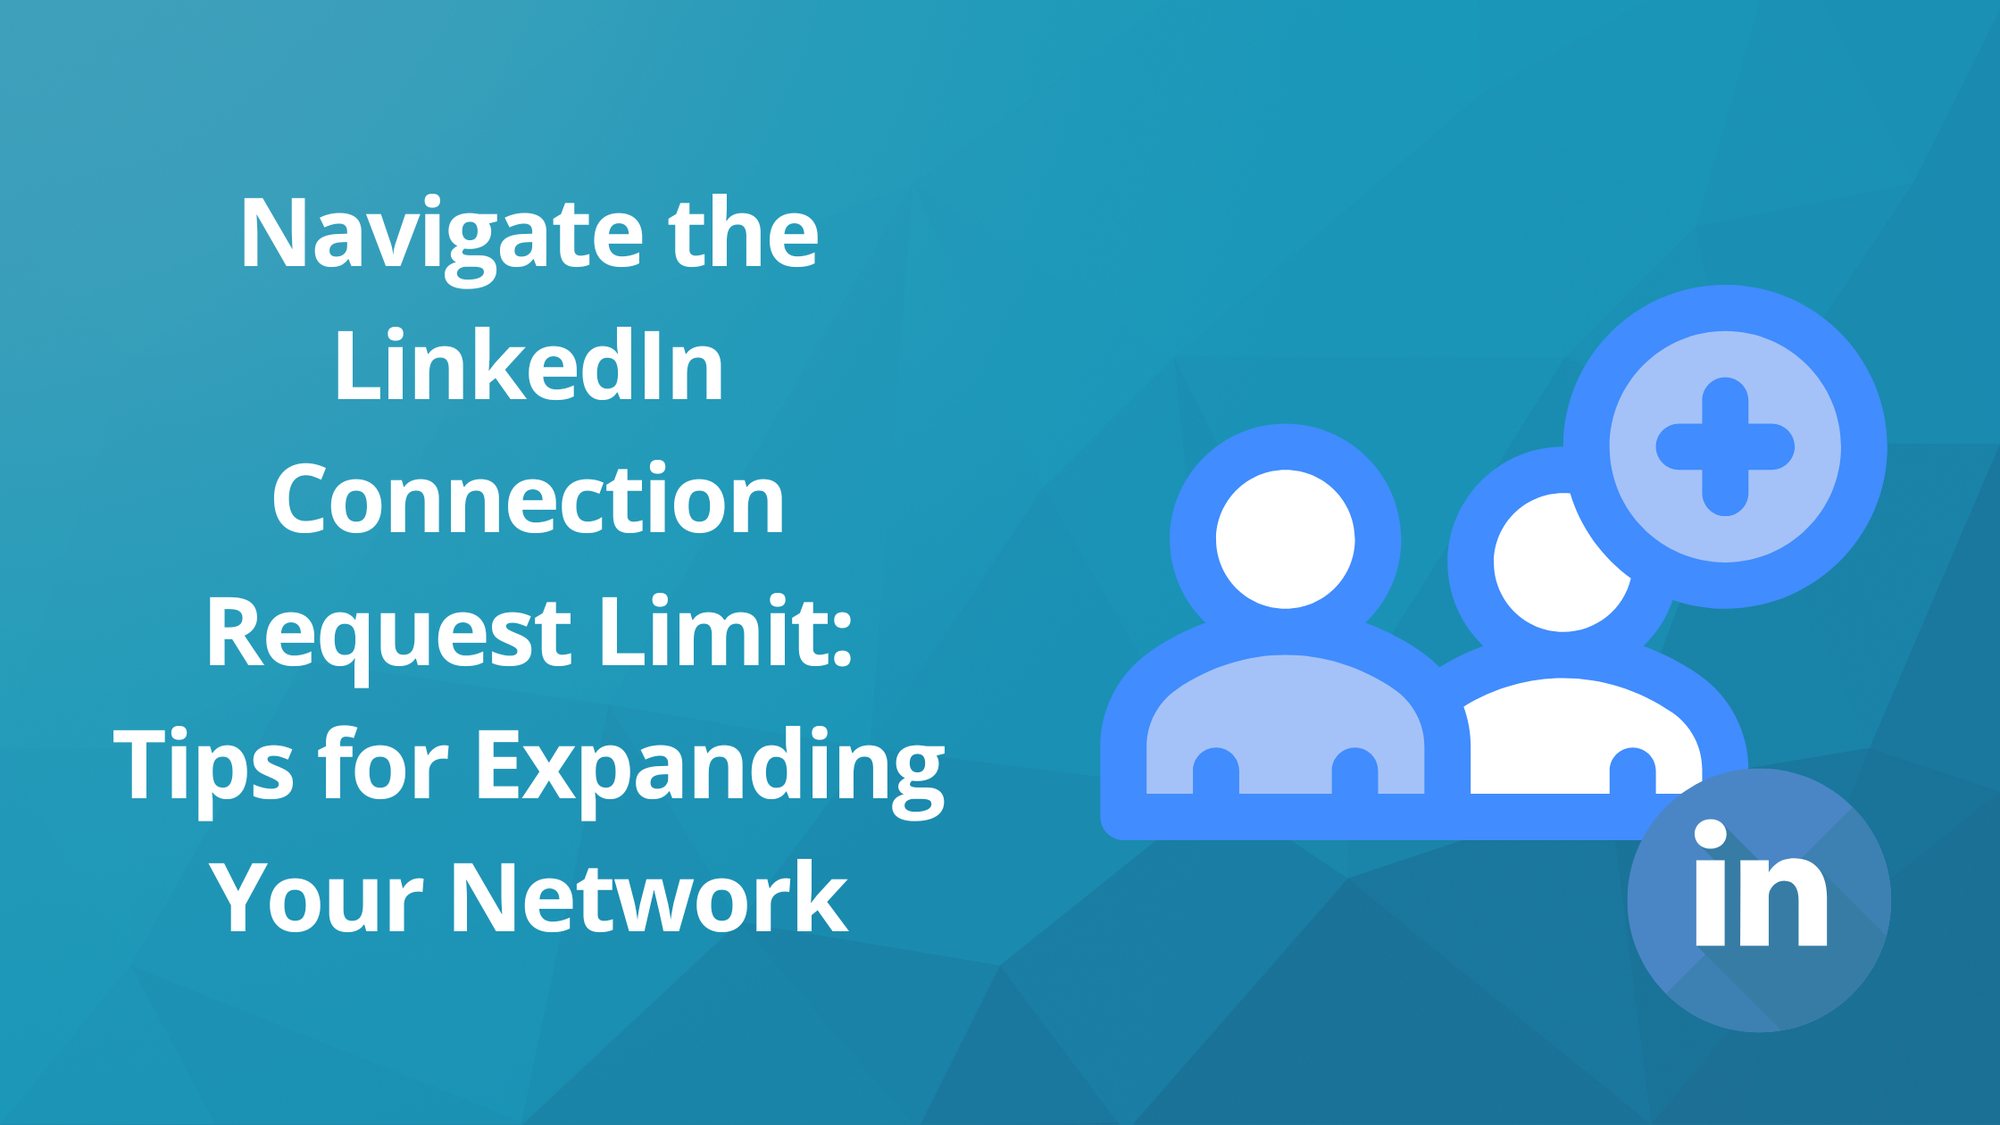 Navigate the LinkedIn Connection Request Limit: Tips for Expanding Your Network